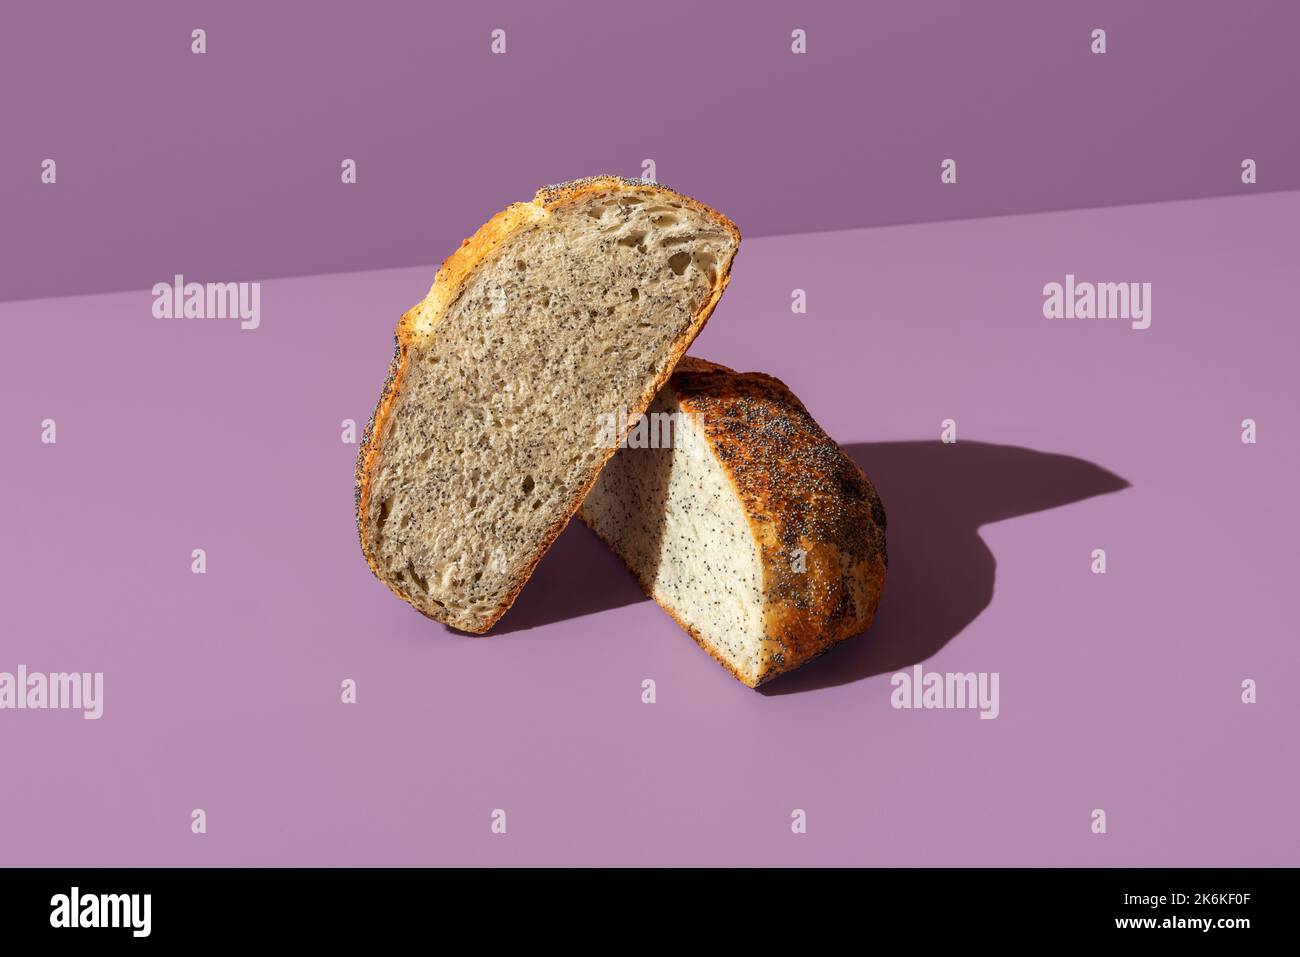 Delicious homemade bread with poppy seeds minimalist on a purple-colored table. Loaf of bread sliced in two halves. Stock Photo